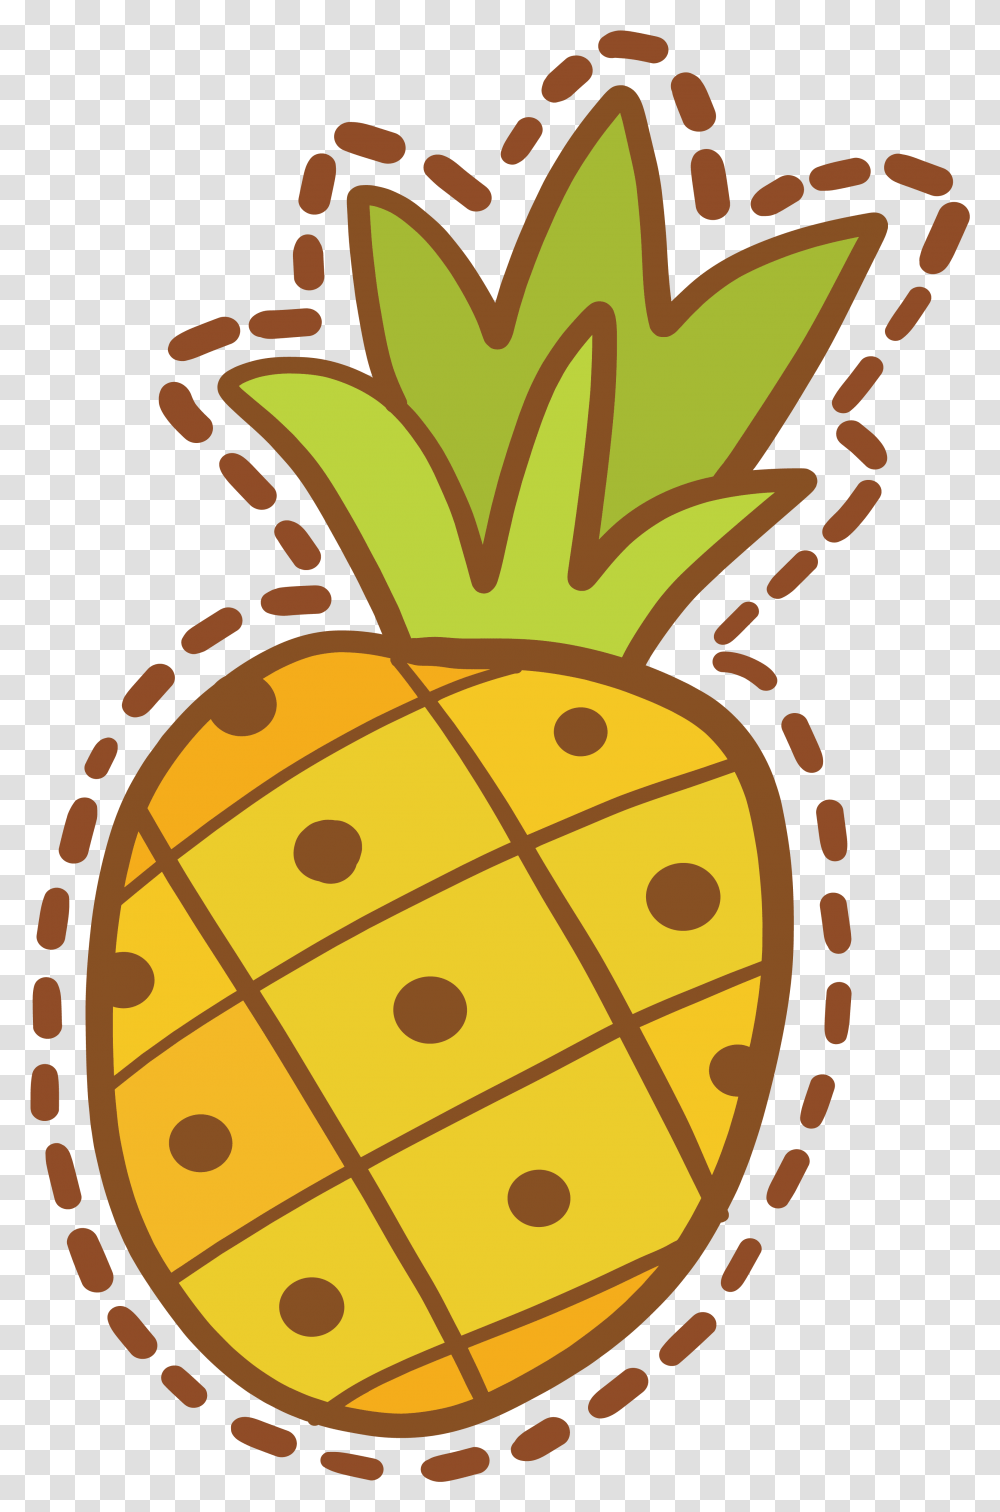 Pineapple Sticker Design Cartoon Dry Pineapple, Food, Plant, Fruit, Sweets Transparent Png